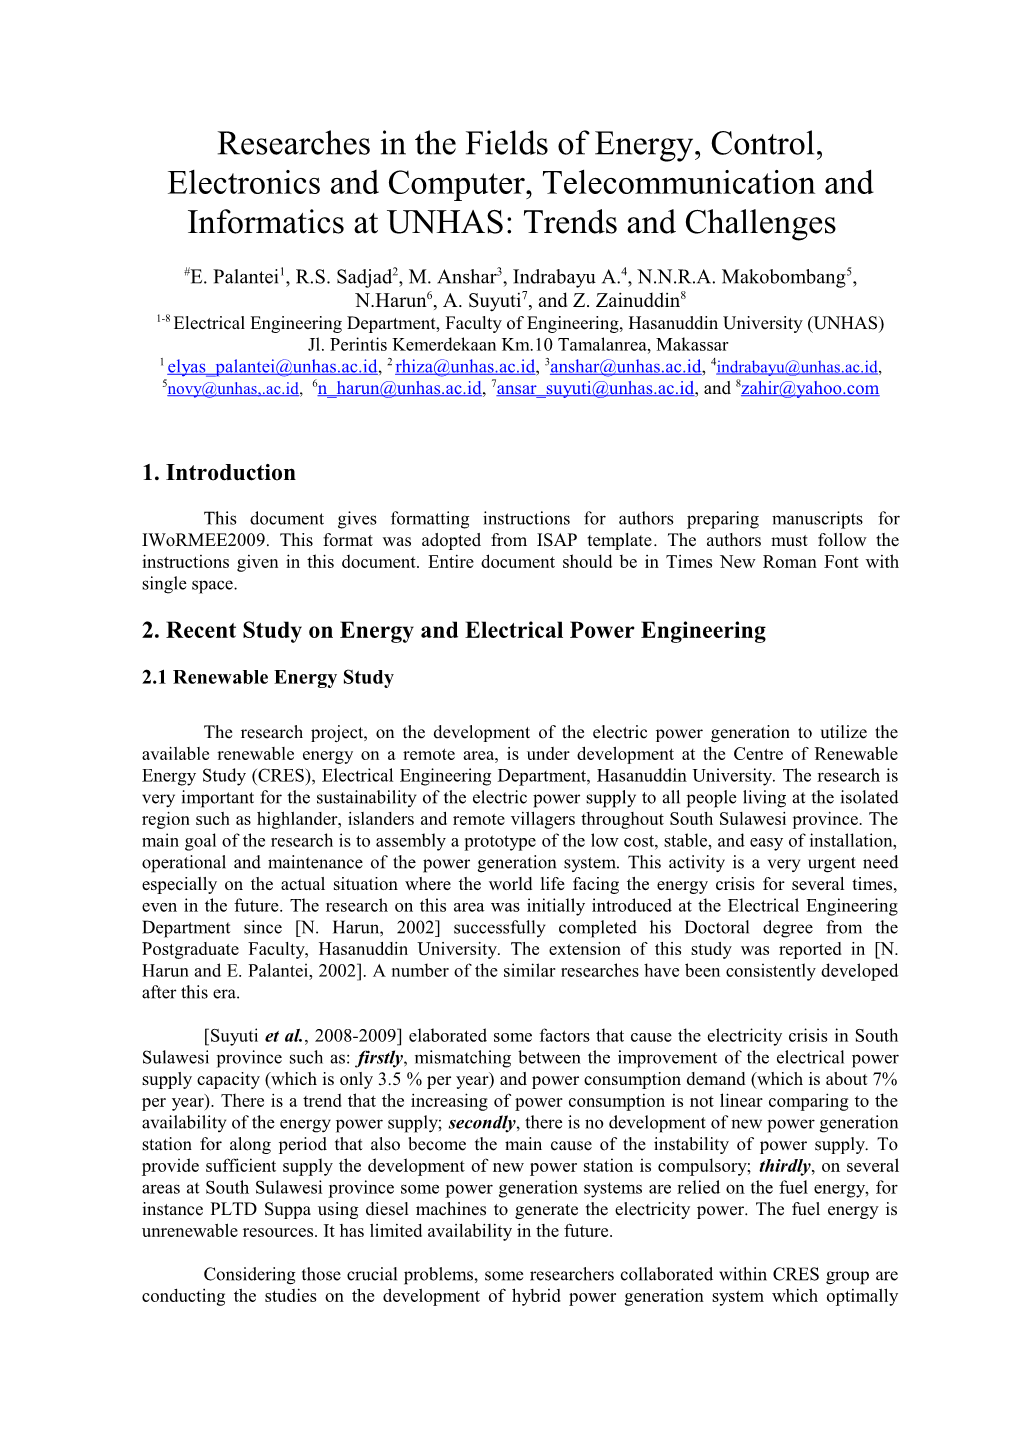 2. Recent Study on Energy and Electrical Power Engineering